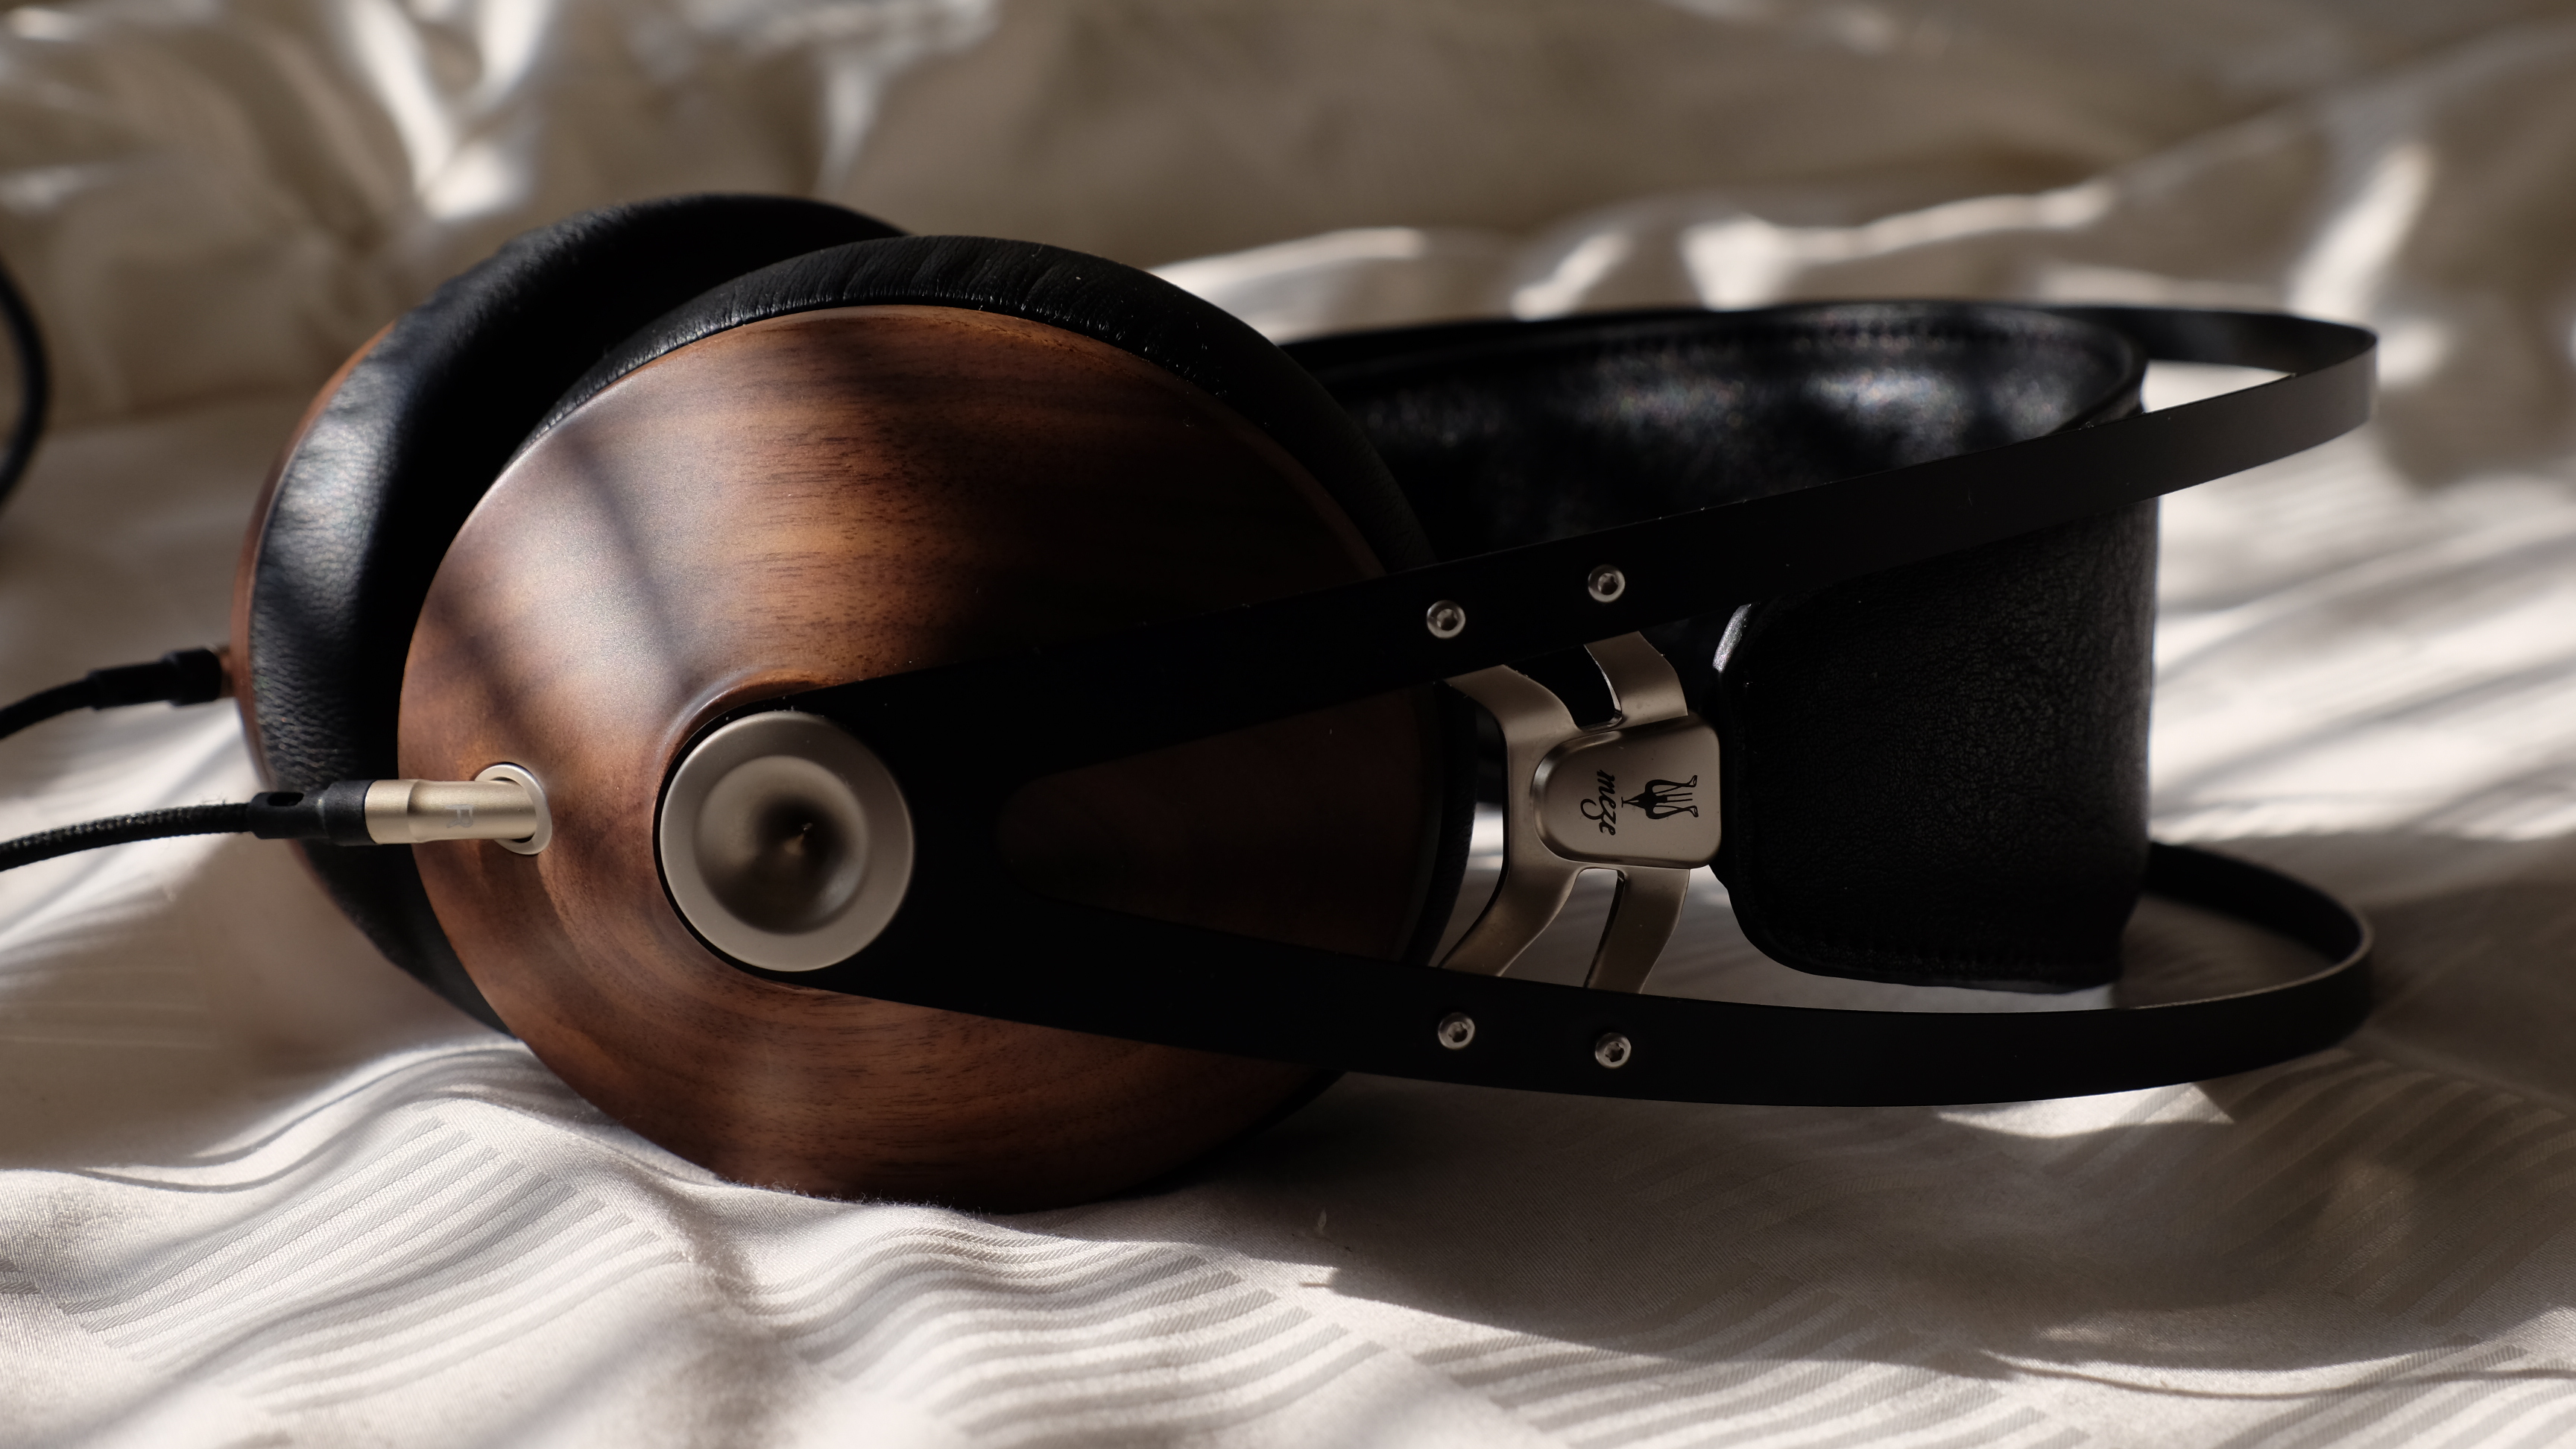 Meze 99 Classics Headphone Review – Quest to Find a Portable Over-Ear Headphone